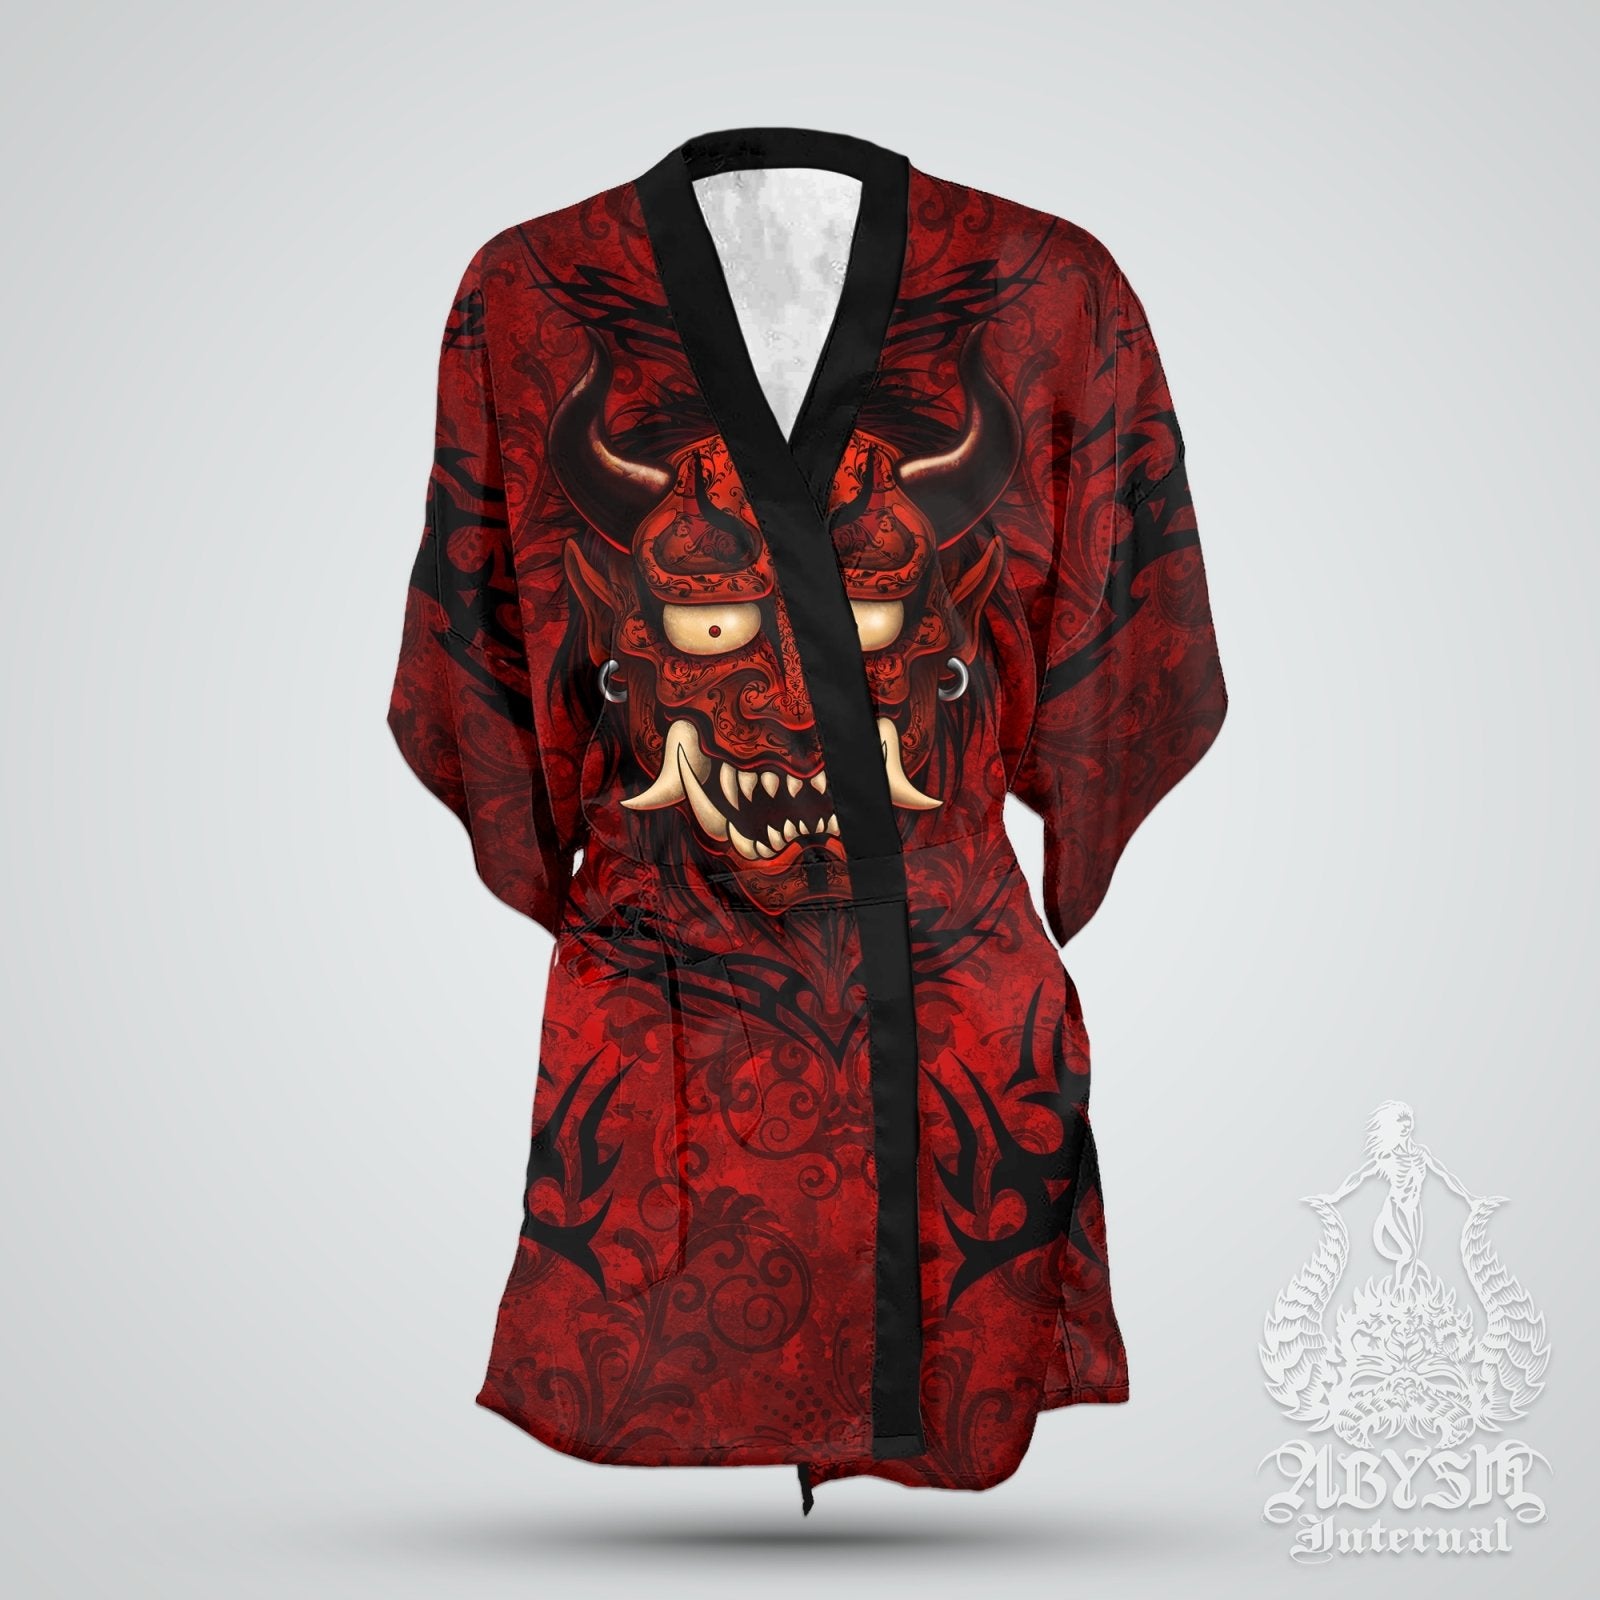 Demon Cover Up, Beach Outfit, Oni Party Kimono, Japanese Summer Festival Robe, Indie and Alternative Clothing, Unisex - Red Black Tattoo - Abysm Internal